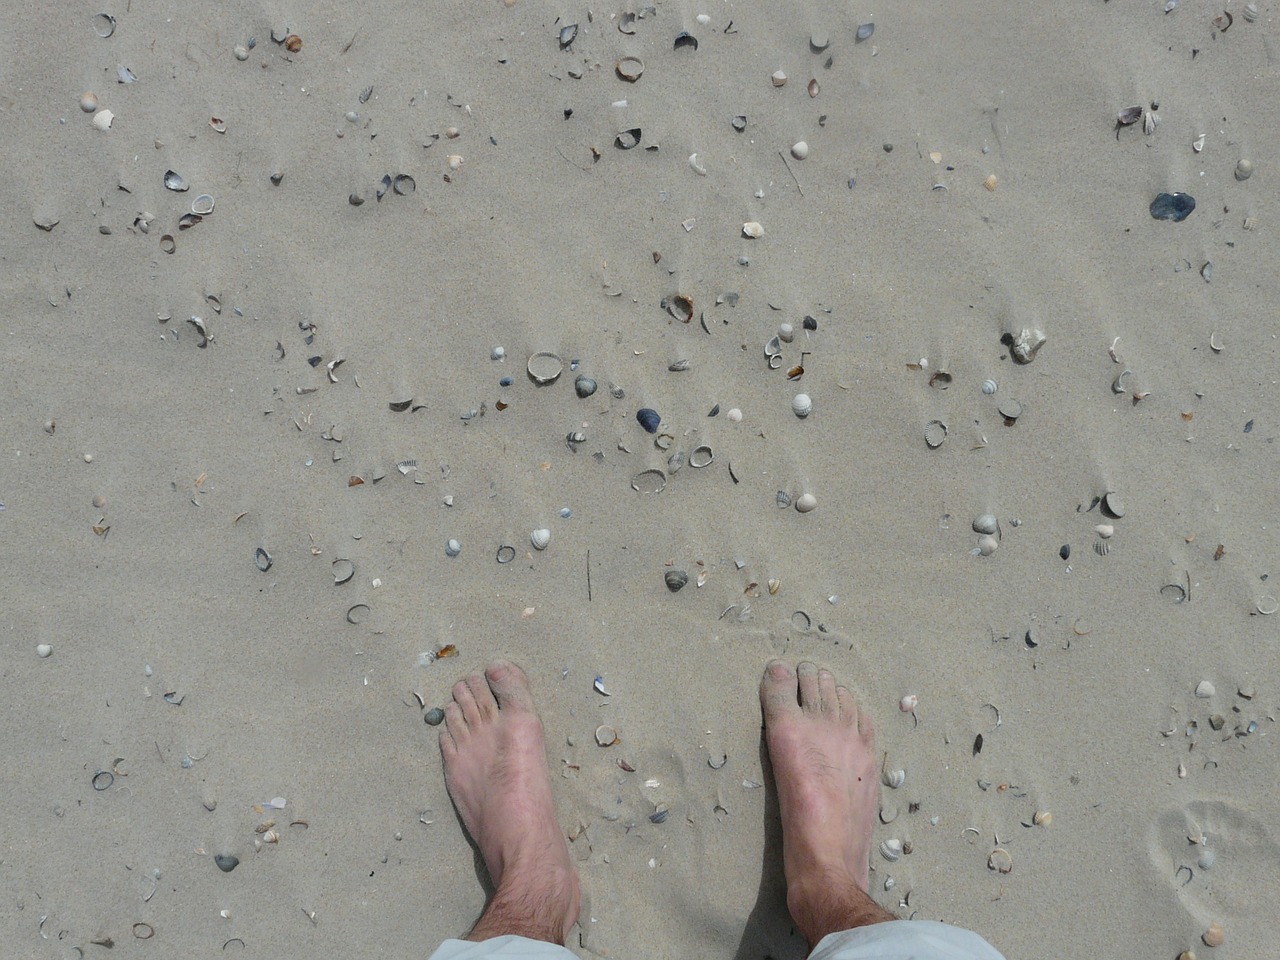 barefoot,feet,ten,sand,beach,mussels,human,person,free pictures, free photos, free images, royalty free, free illustrations, public domain